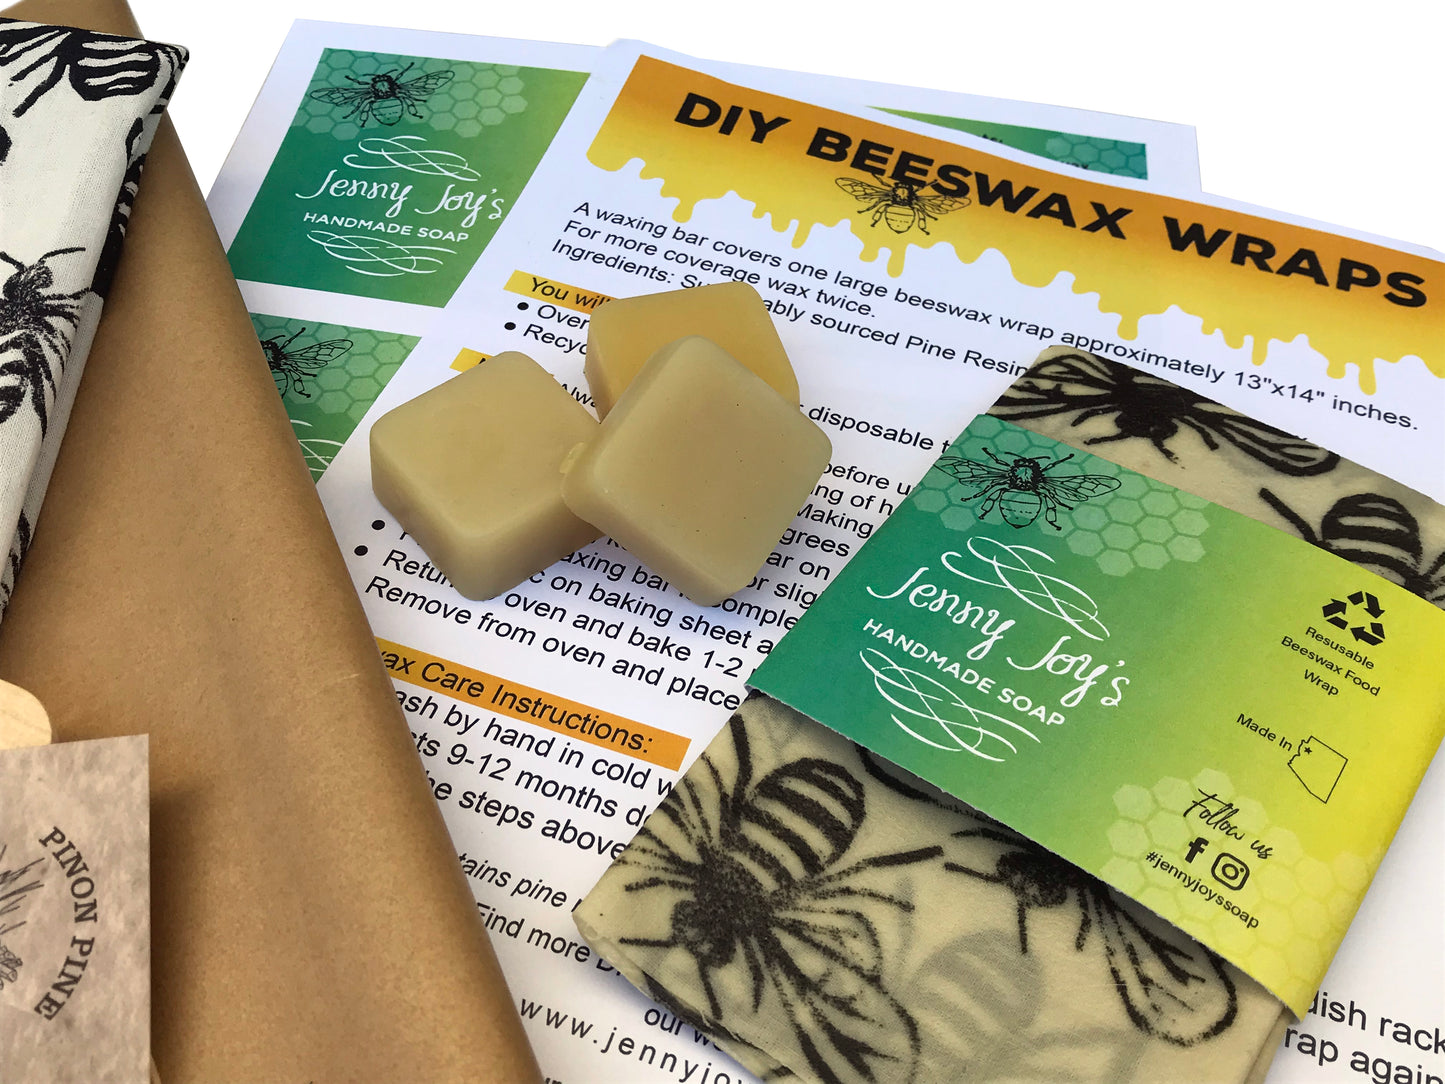 DIY Beeswax Wrap Kit Premium with Everything, Perfect for Gifts